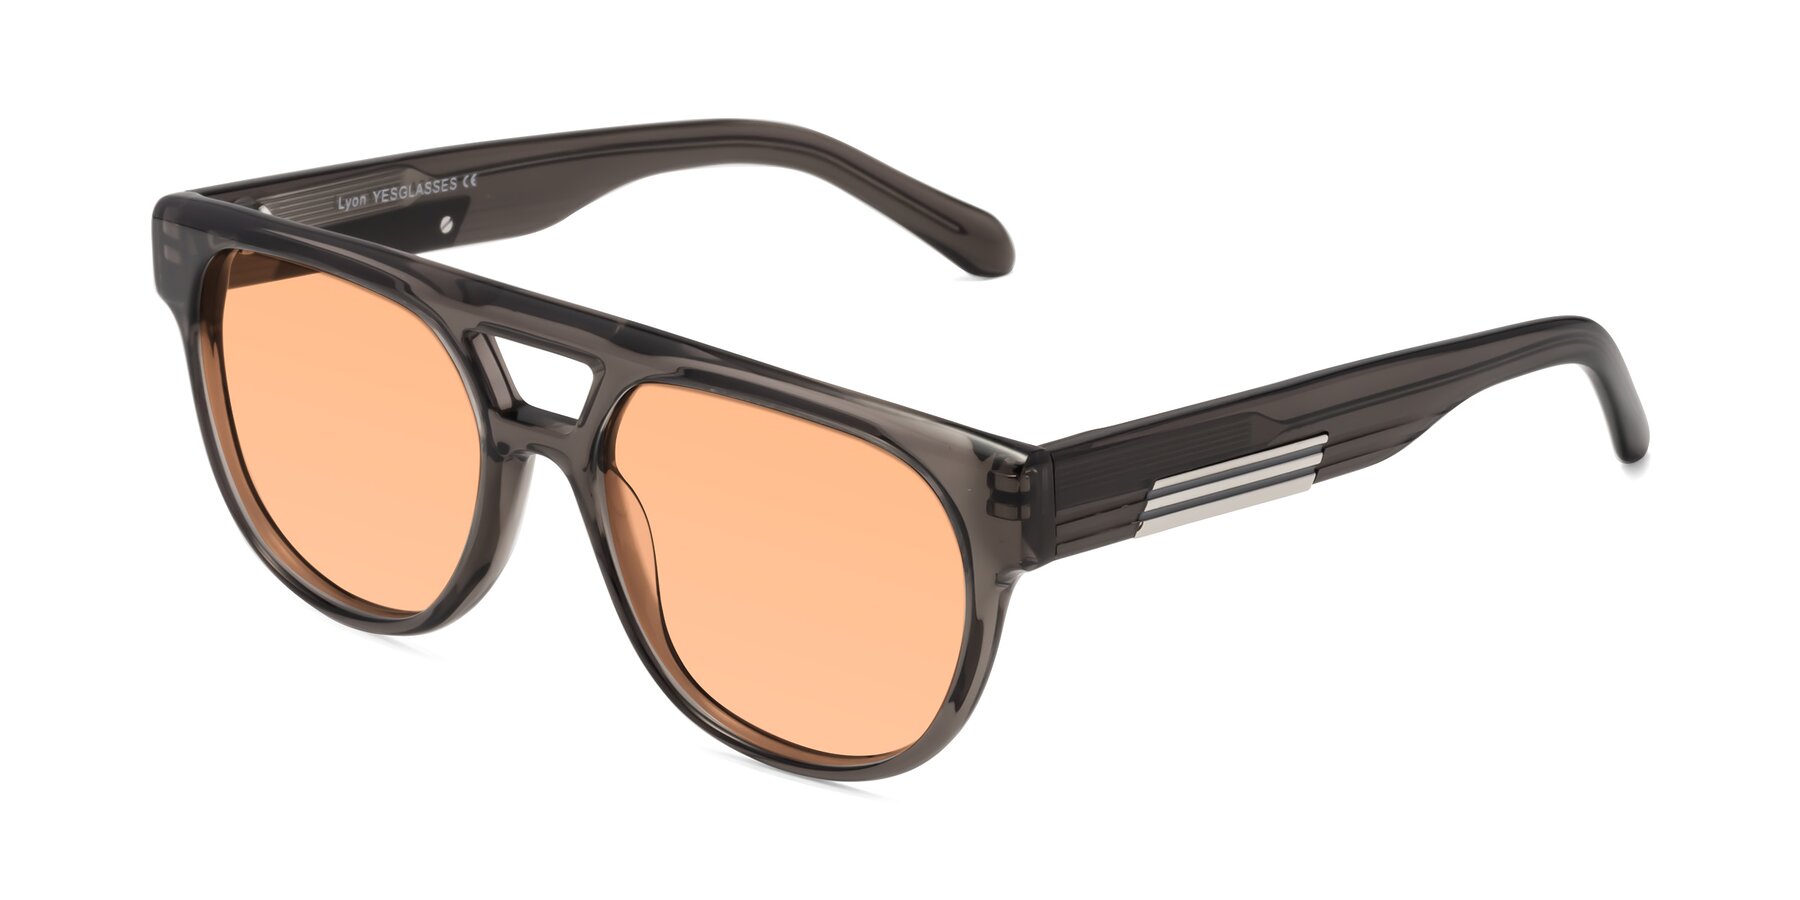 Angle of Lyon in Charcoal Gray with Light Orange Tinted Lenses